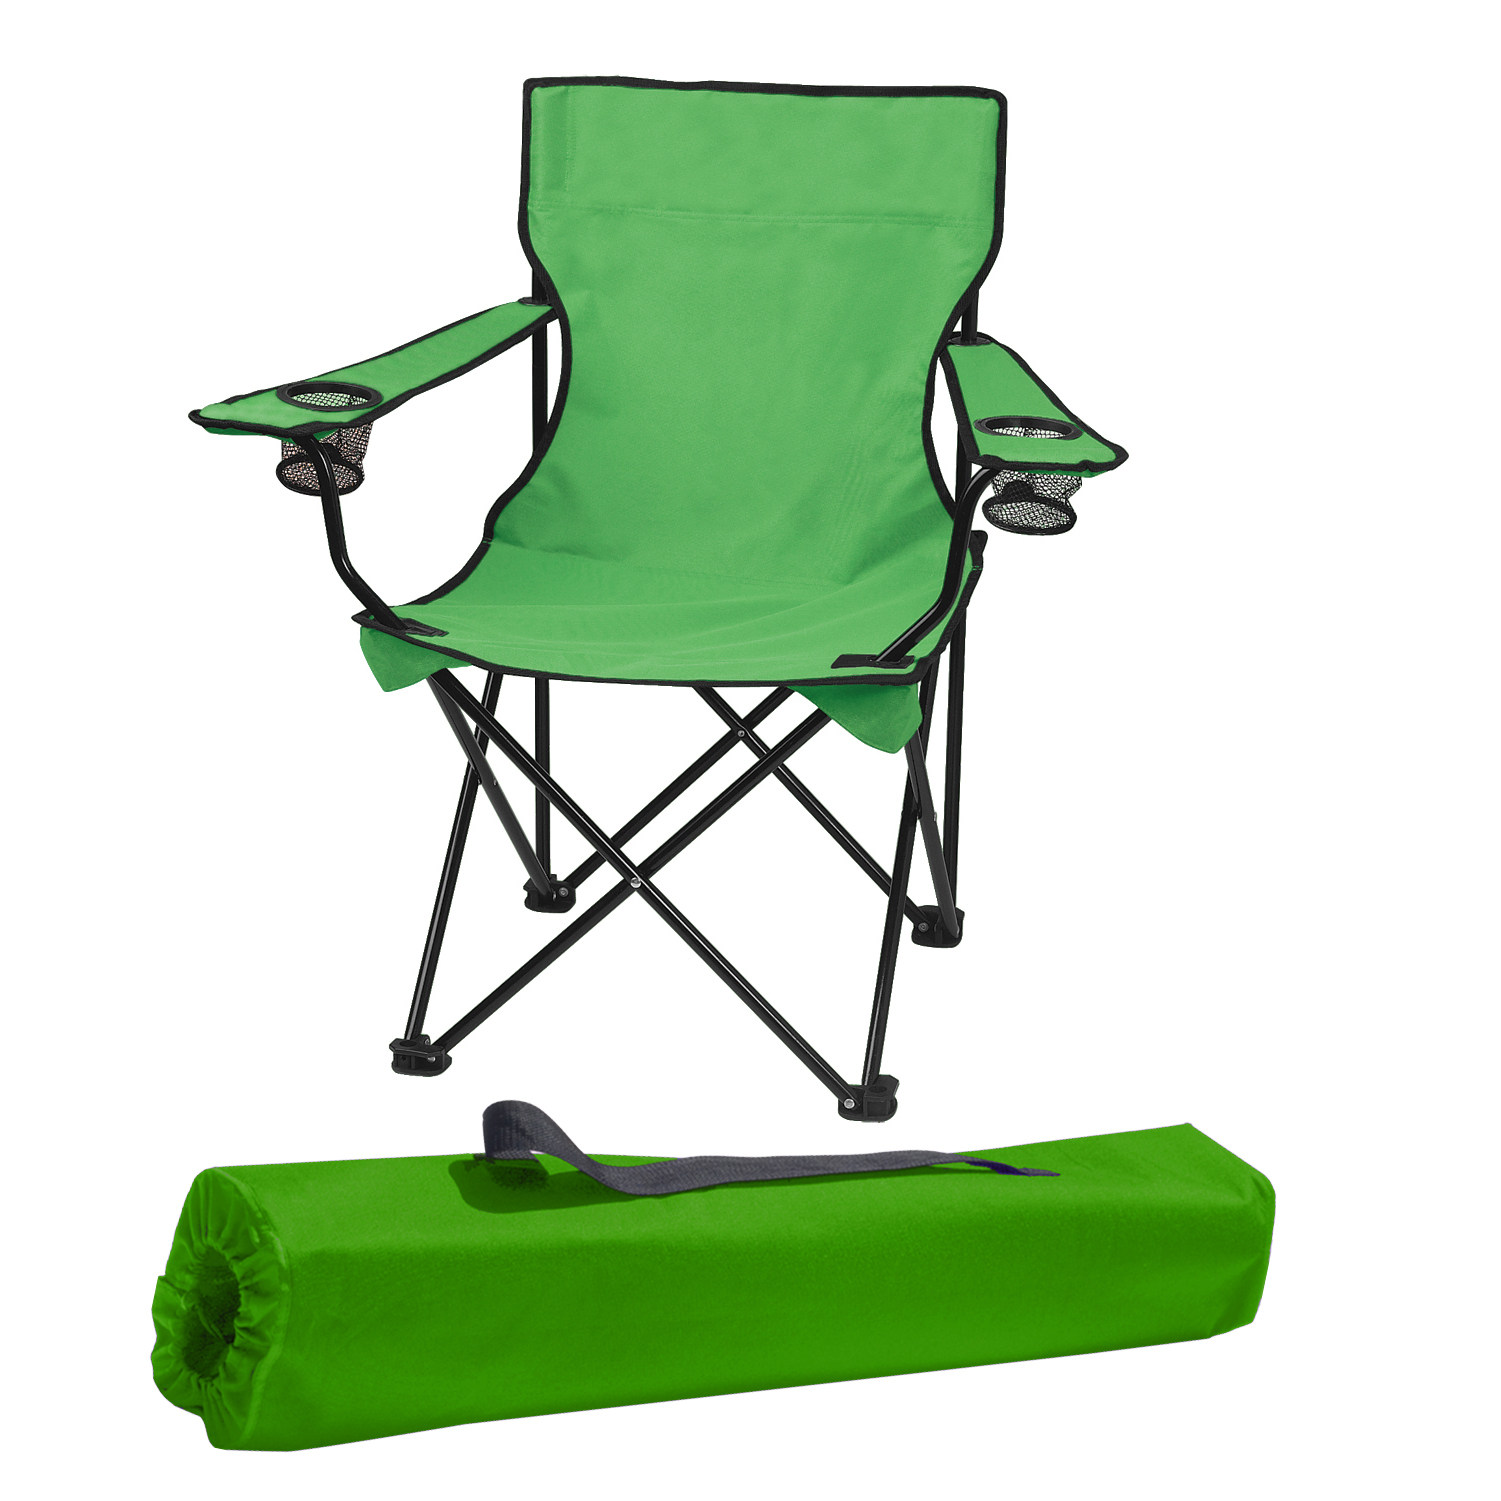 Outdoor Camp Picnic BBQ Folding Chairs With Cup Holder